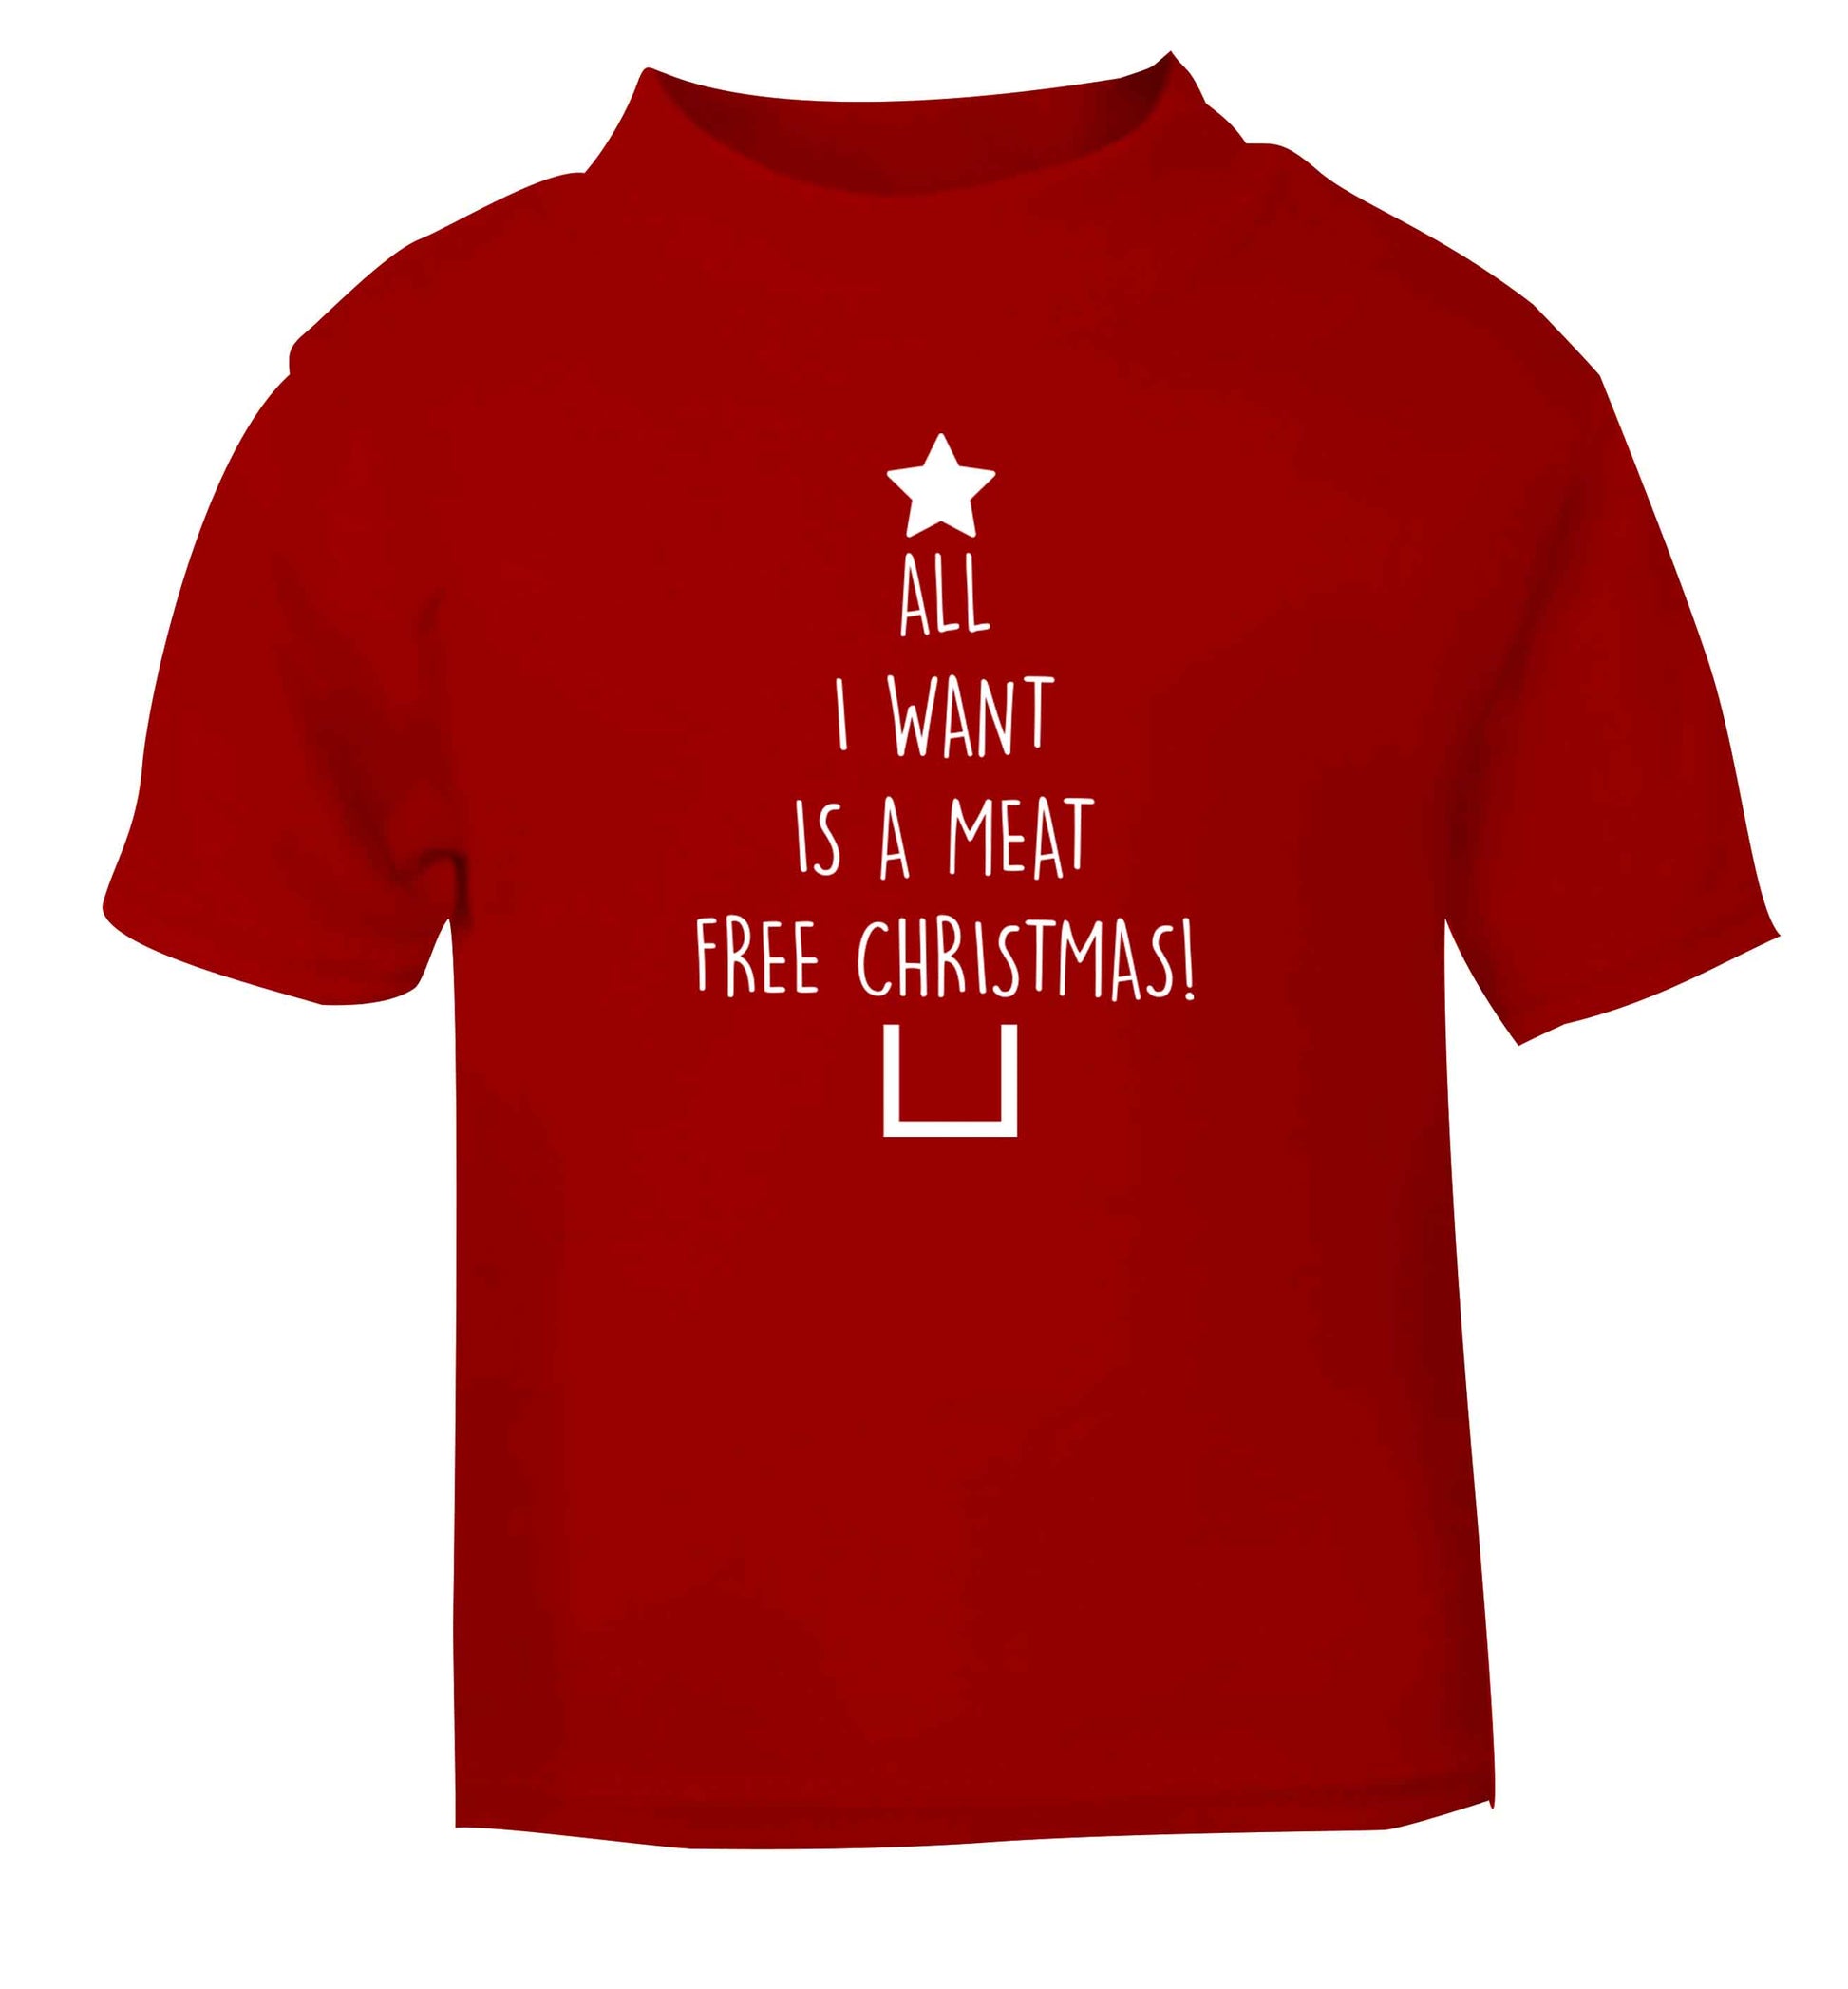 All I want is a meat free Christmas red Baby Toddler Tshirt 2 Years